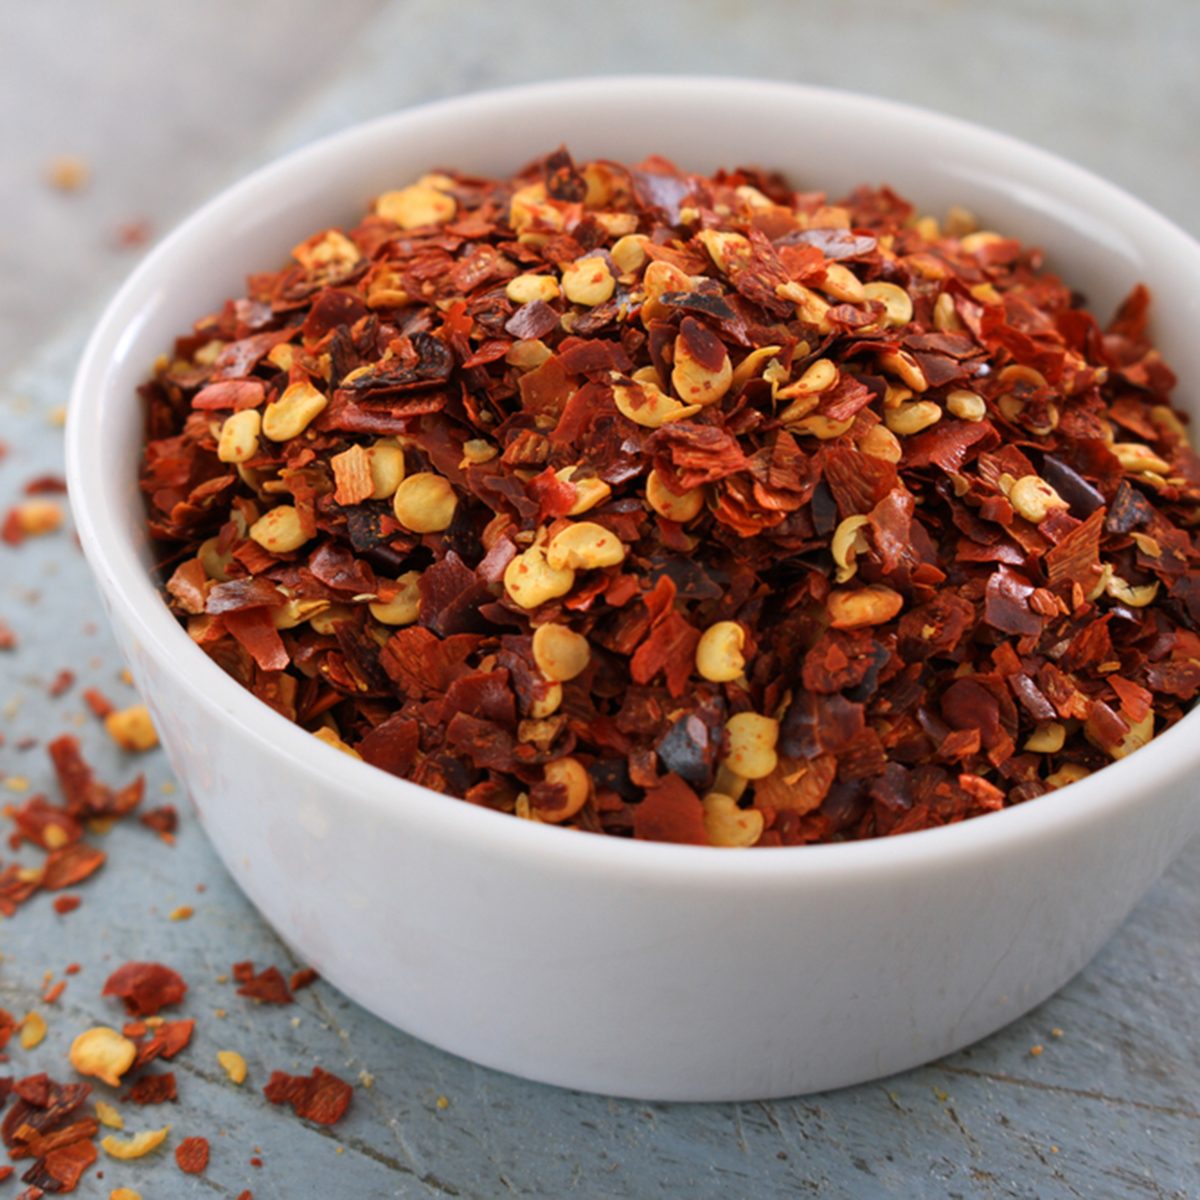 https://www.tasteofhome.com/wp-content/uploads/2018/08/Crushed-Red-Pepper-Flakes.jpg?fit=700%2C700